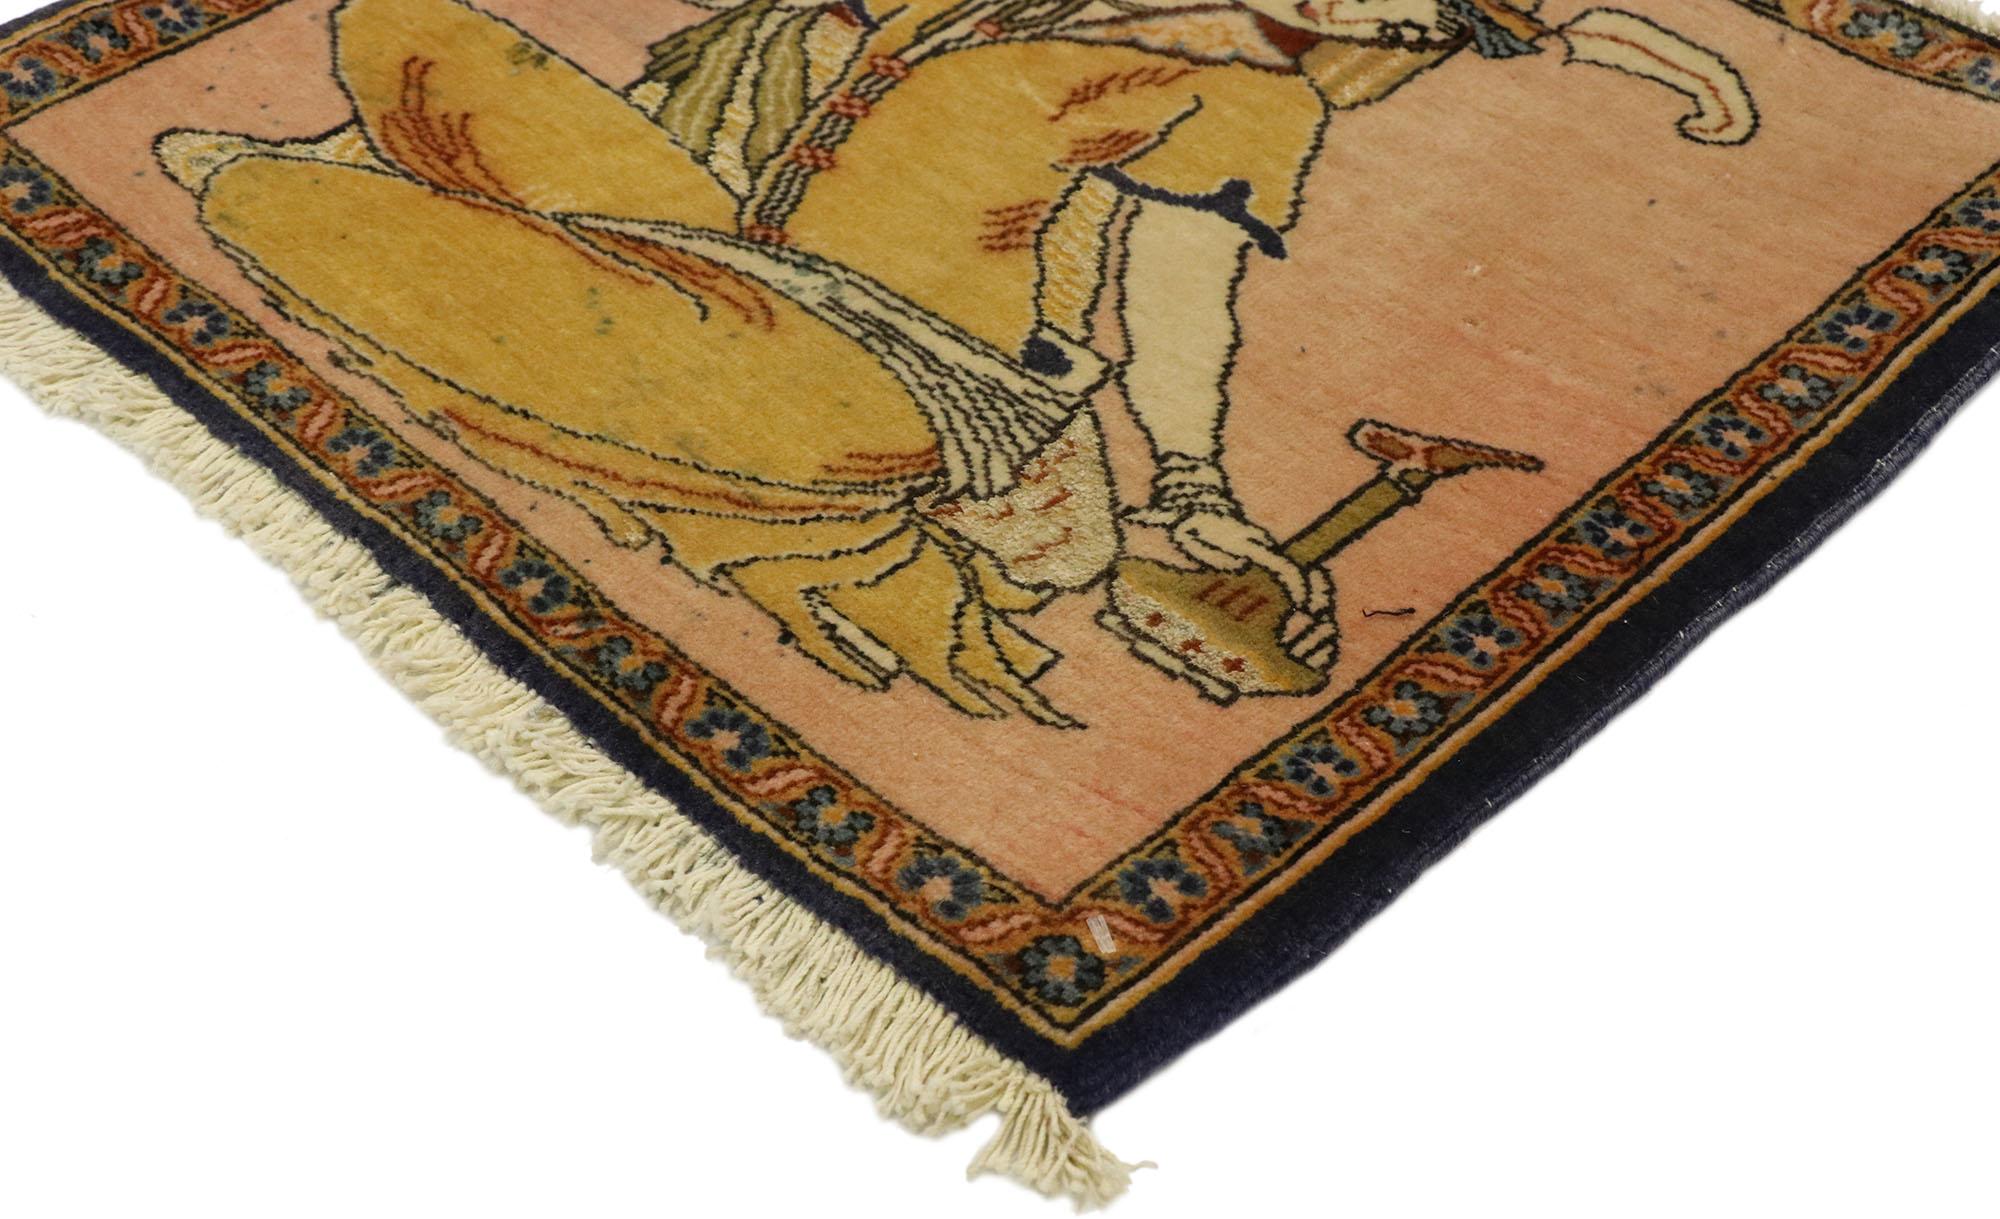 76197, vintage Persian Khamseh Pictorial rug with Dervish Scene, Persian wall hanging. Ancient Persia boasts the true origin of viticulture and wine drinking as celebrated in this hand knotted wool vintage Persian Khamseh pictorial rug. Tender and